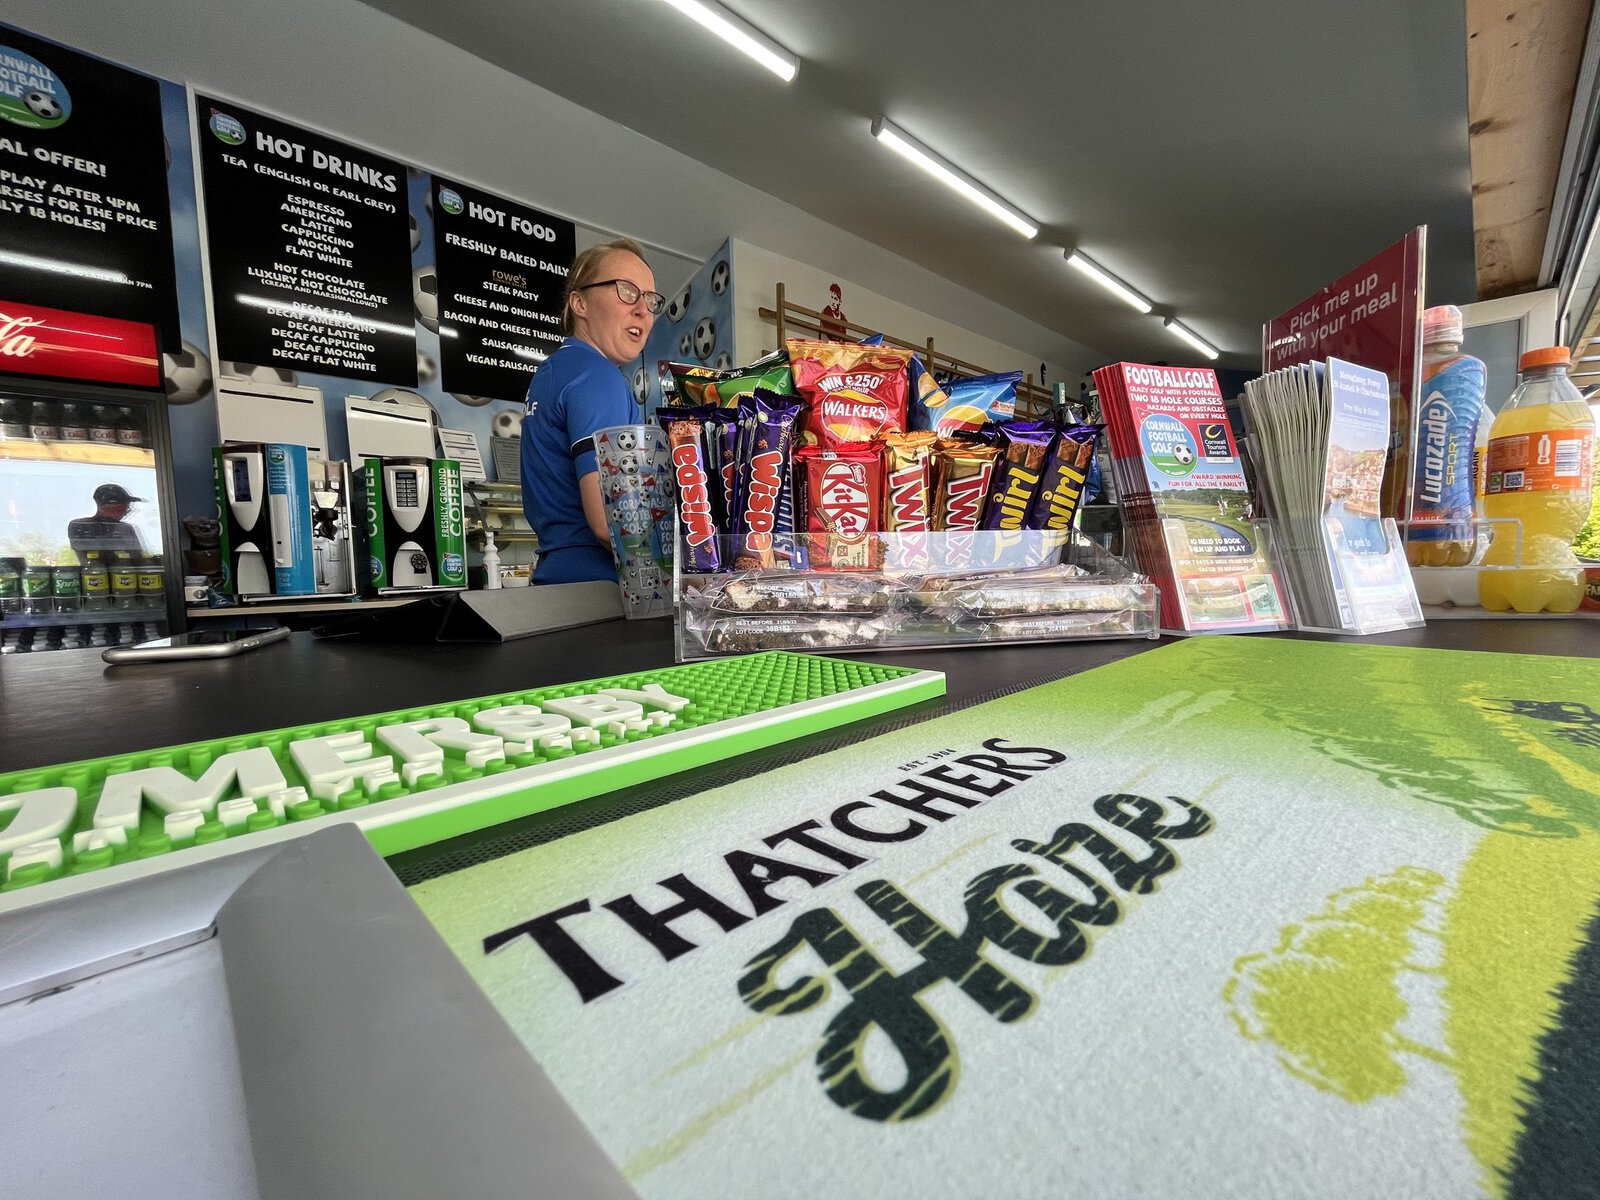 The 19th Hole - Licensed Bar - Selling Hot Food, Drinks, Ice Creams